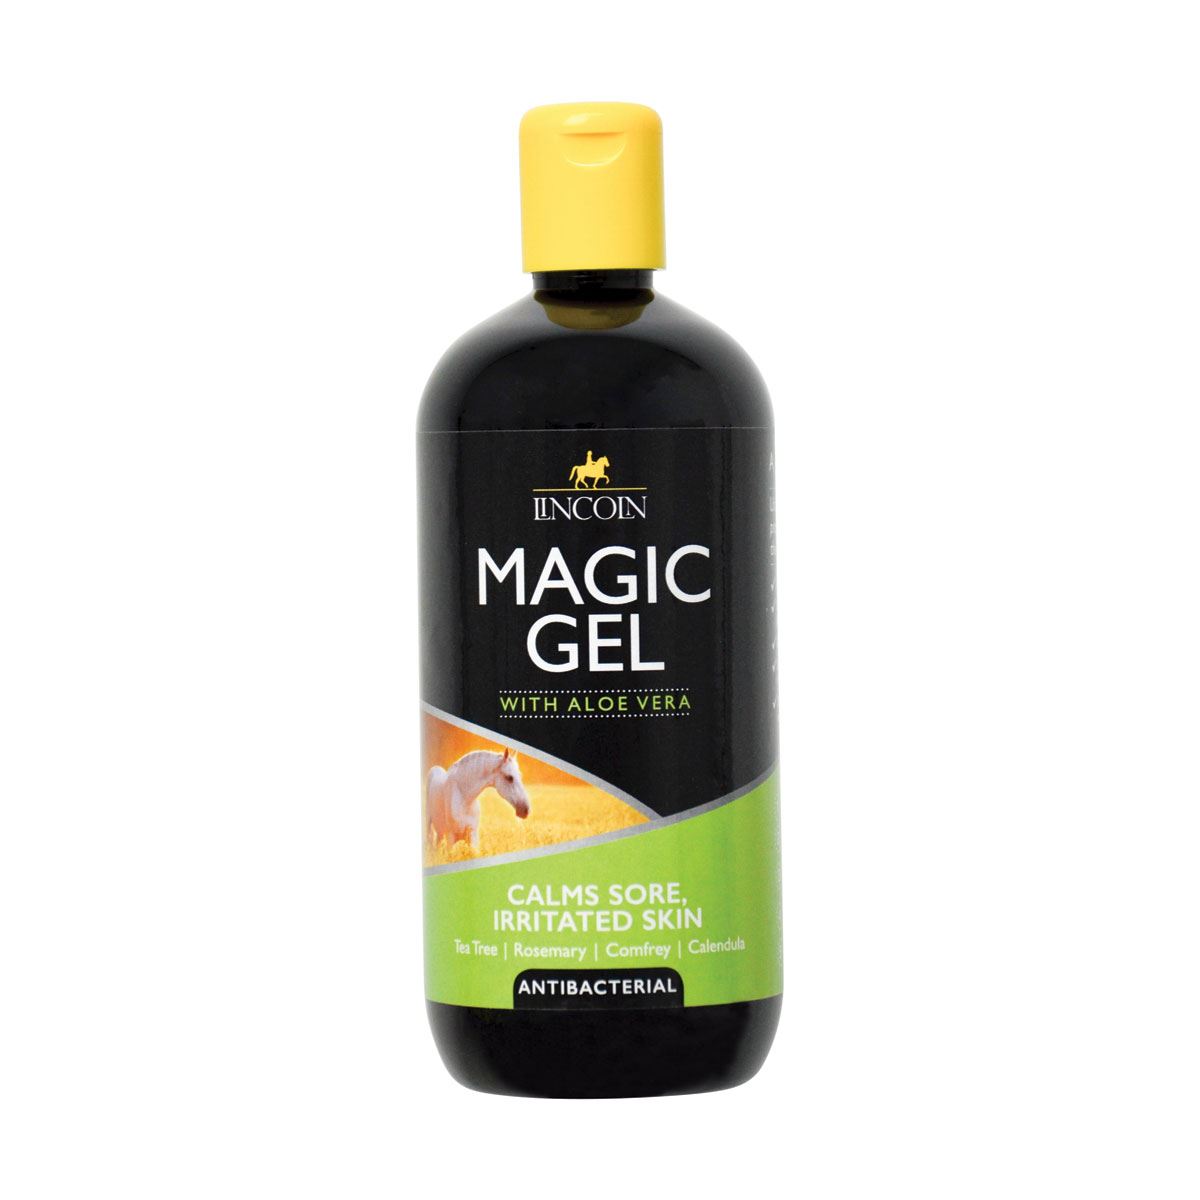 Lincoln Magic Gel - Just Horse Riders